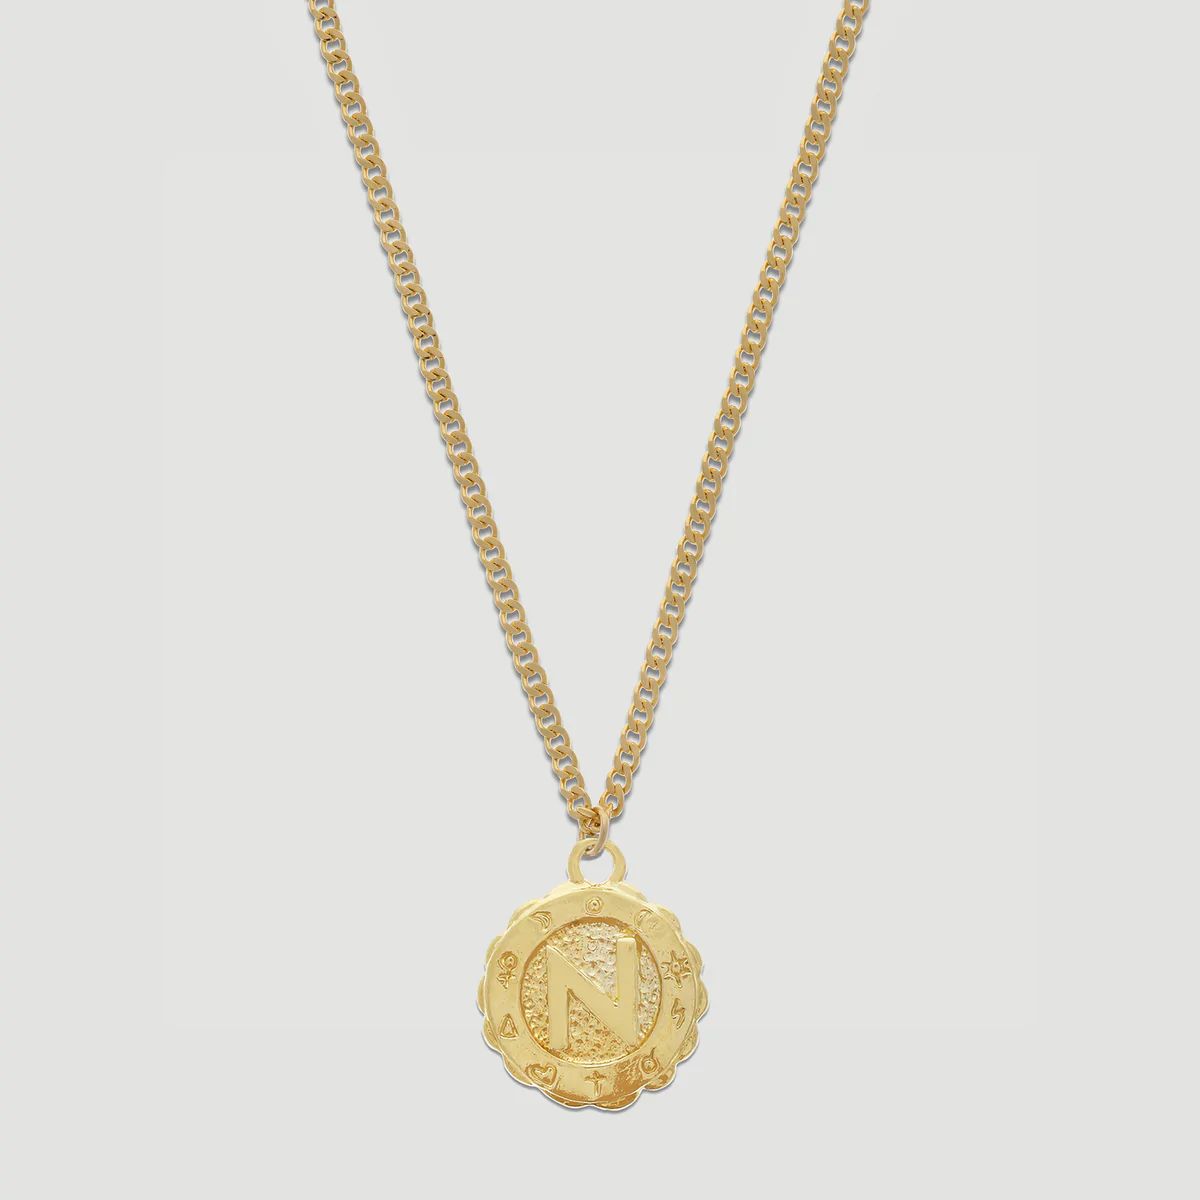 goddess initial necklace | Cuffed by Nano